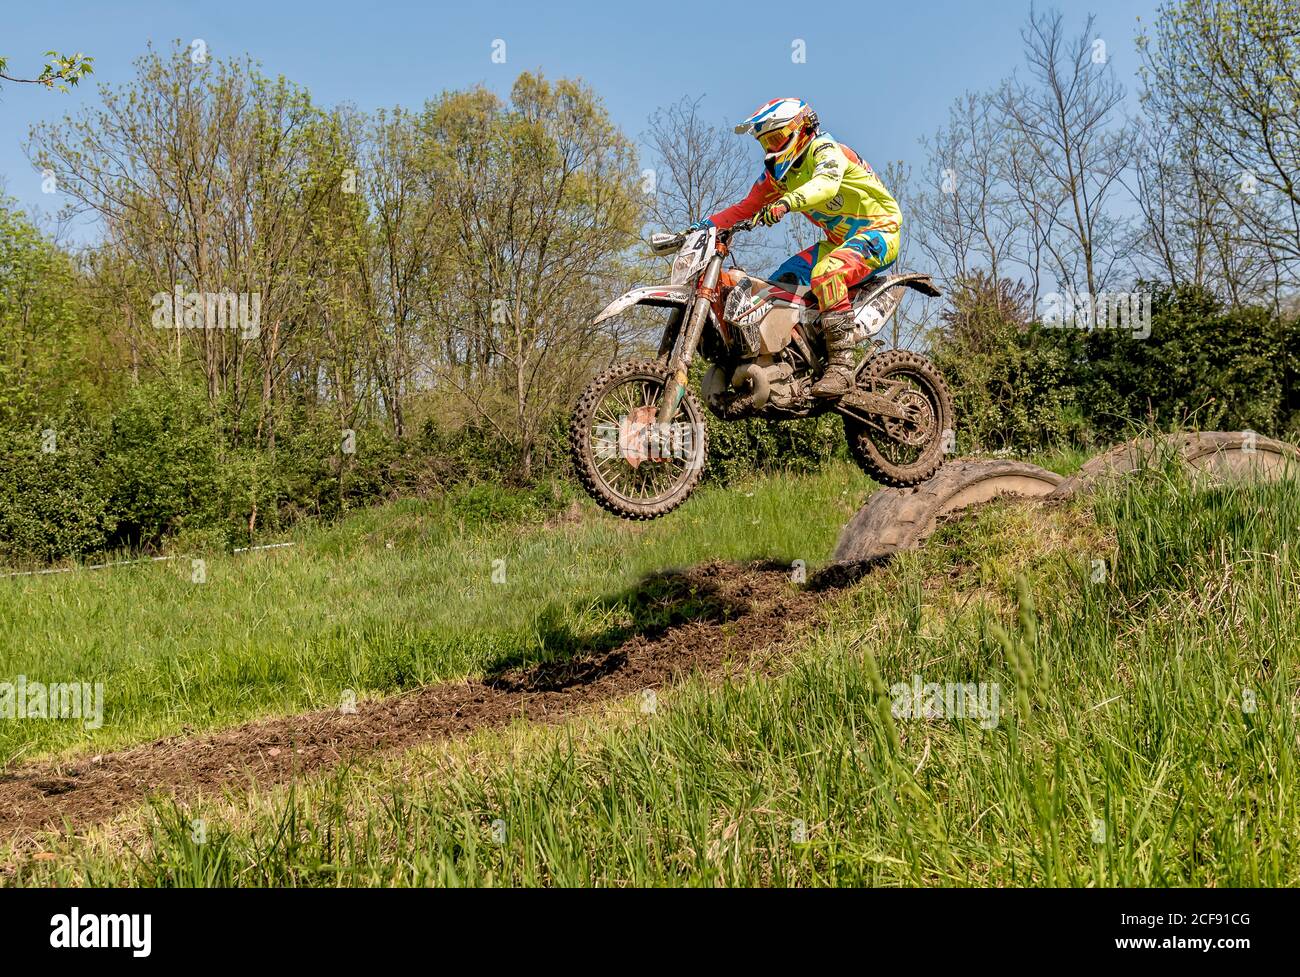 Biandronno, Lombardy, Italy - April 22, 2018: Motocross rider in jumping from the trampoline above the road. Open competitions in motocross. Stock Photo